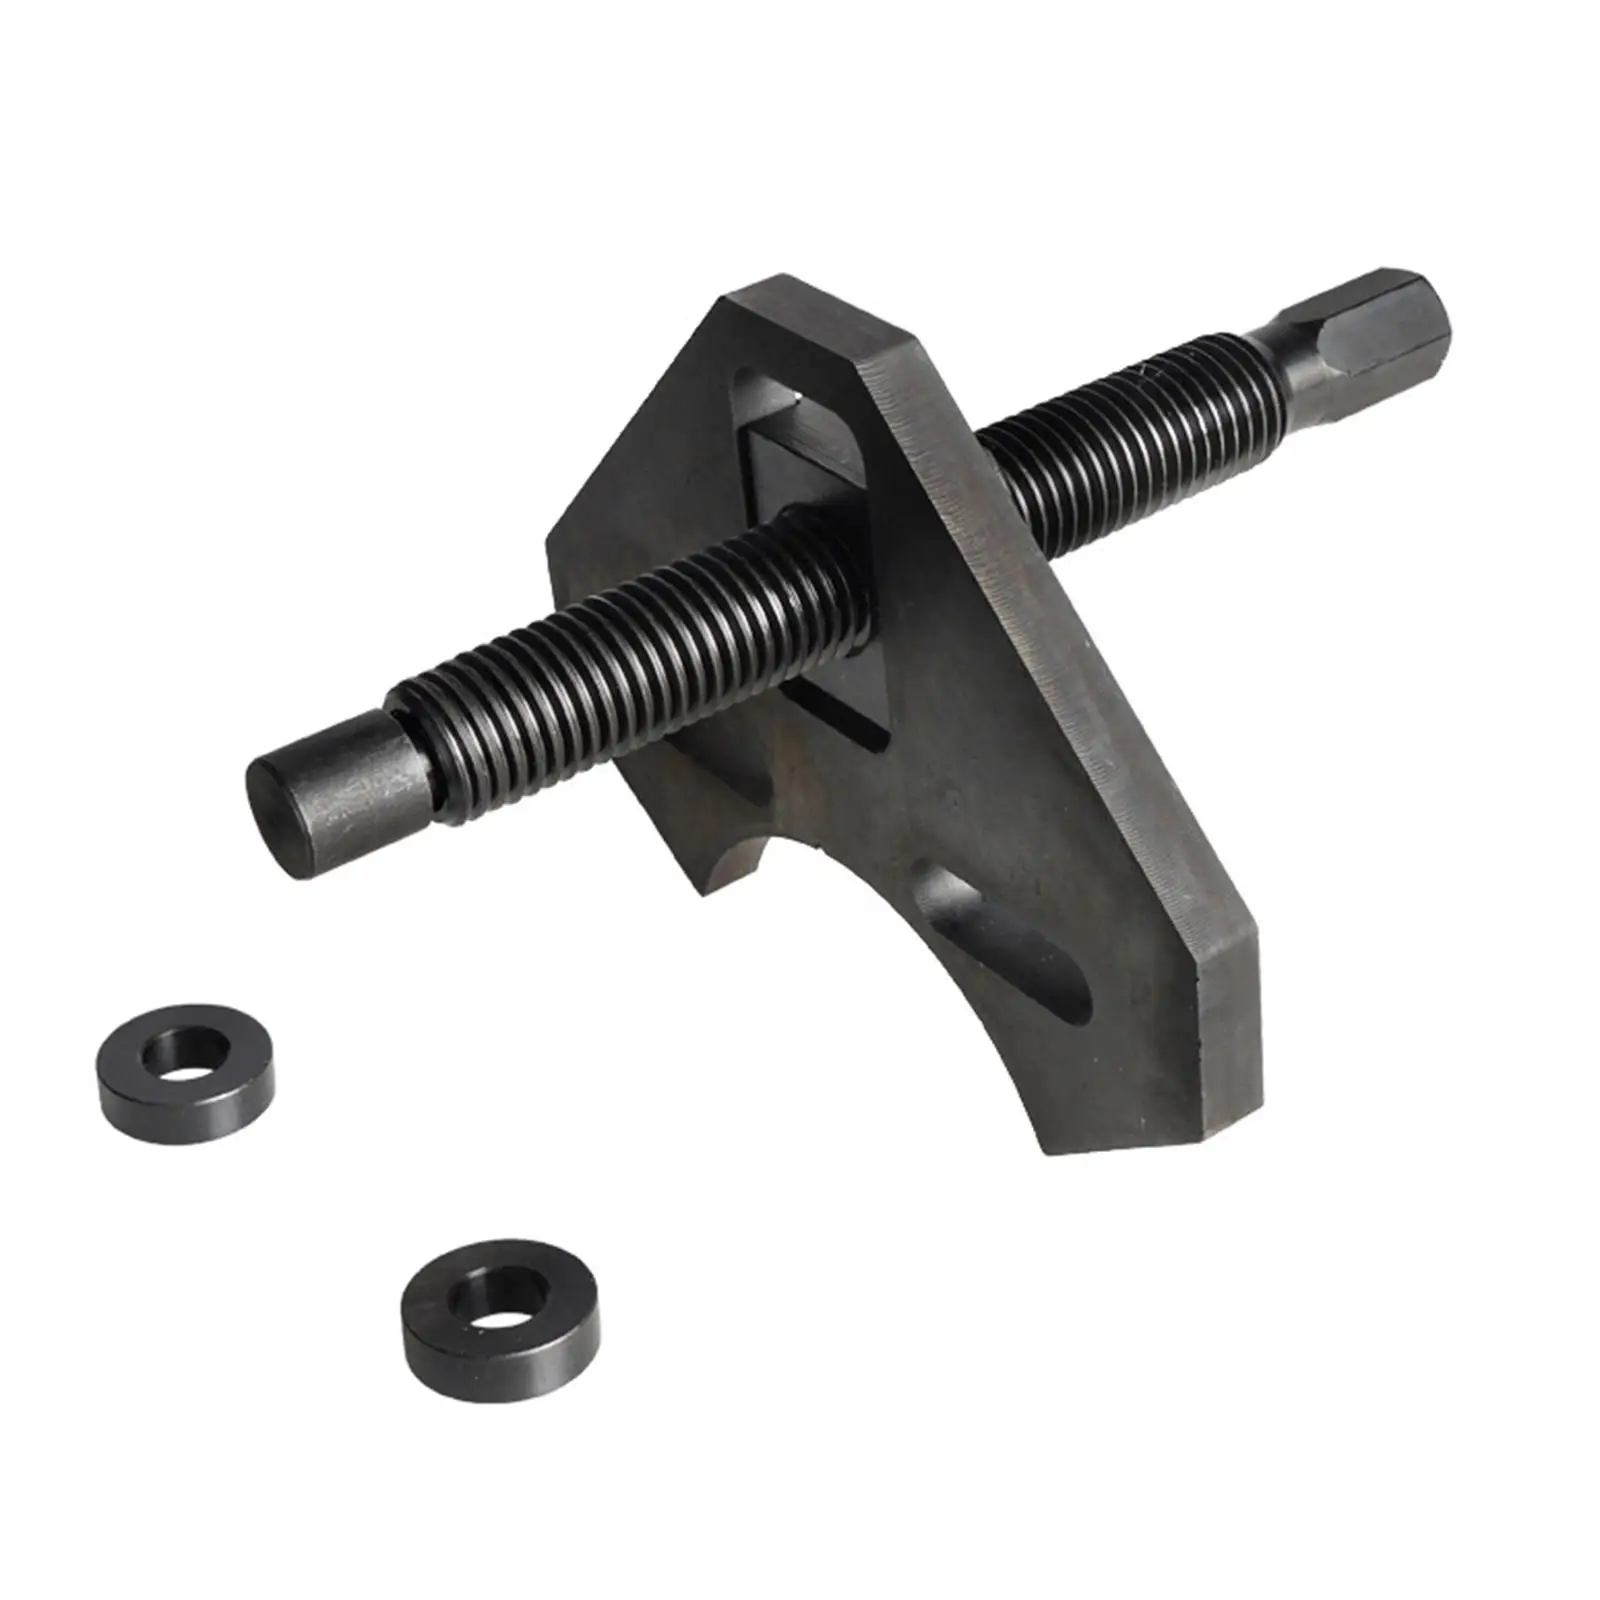 Hub Removal Tool Easy to Install Durable Practical for Most 5 6 8 Lug Hub Assemblies